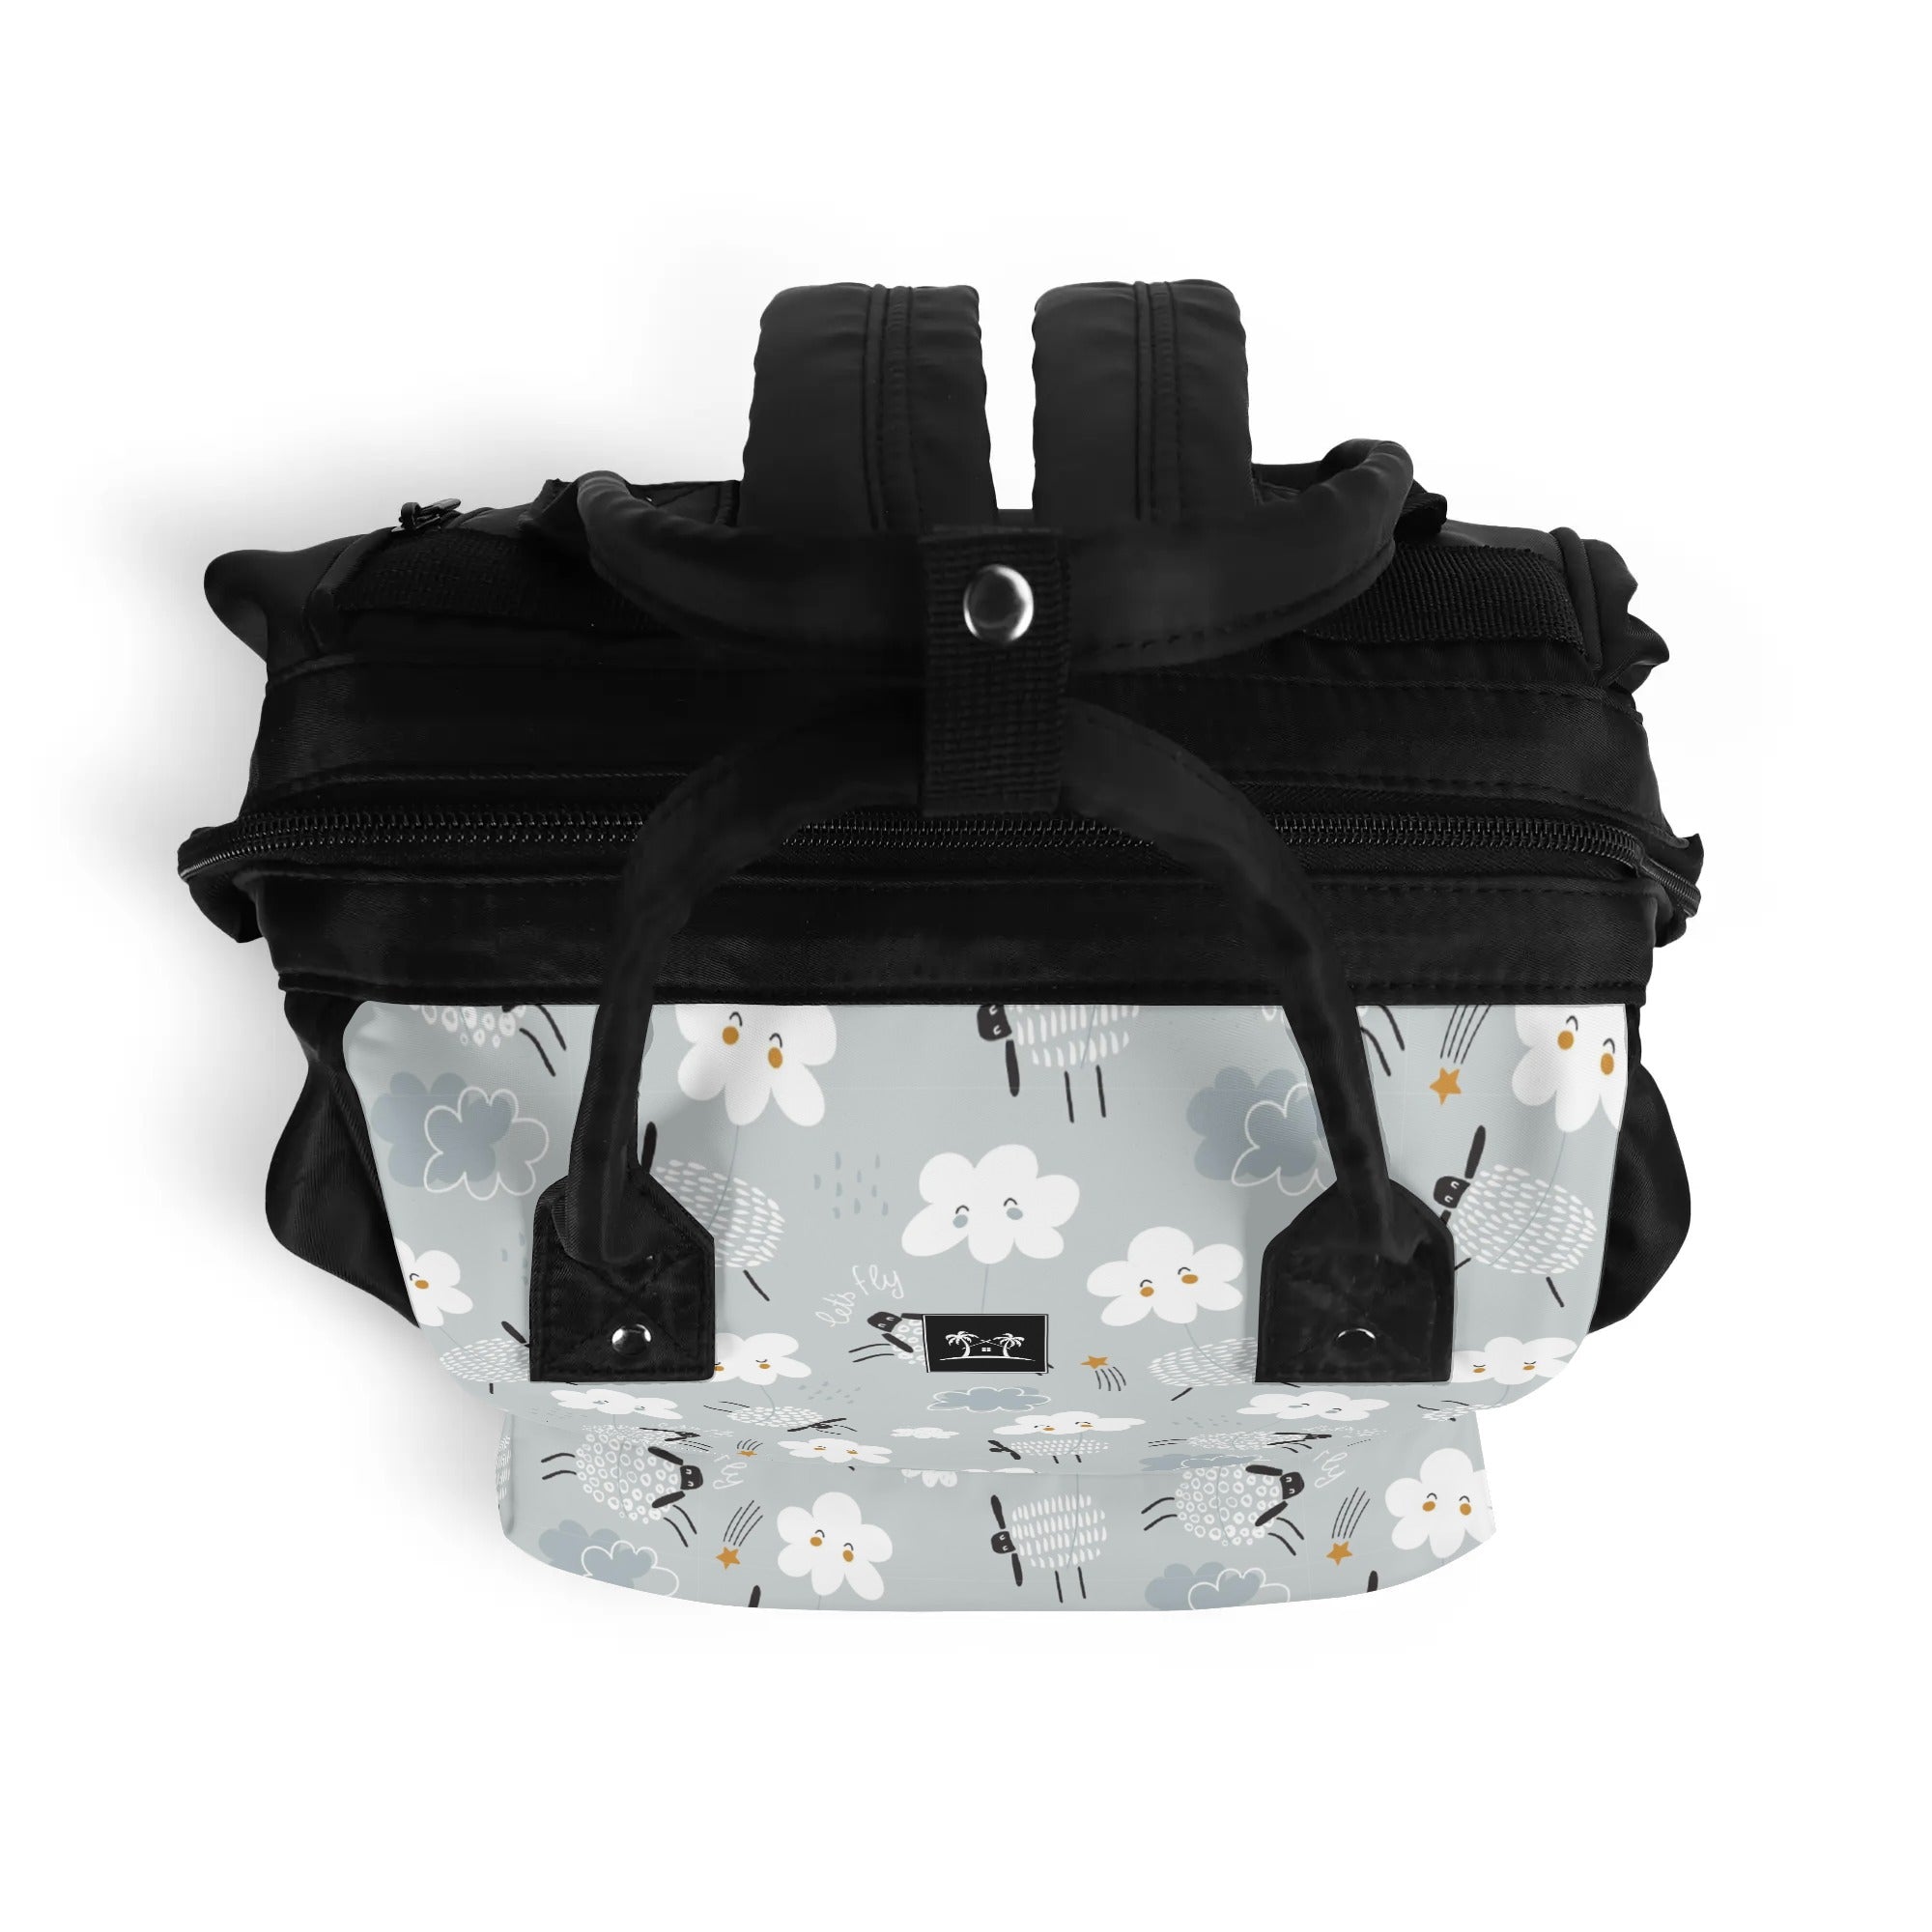 Large Capacity Diaper Backpack - Counting Sheep